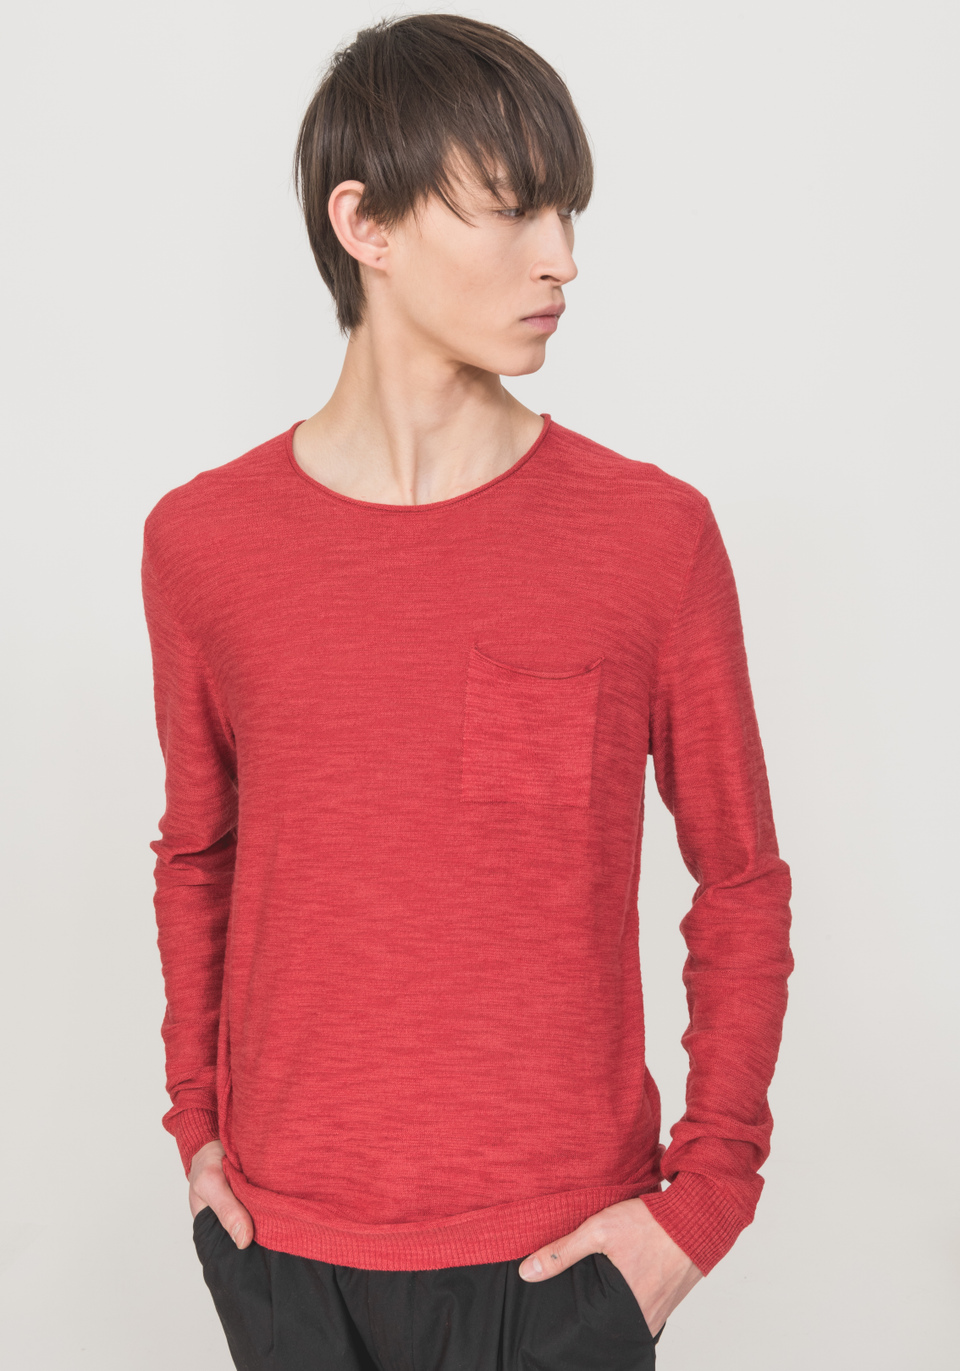 CREW-NECK SWEATER WITH BREAST POCKET AND RAW-CUT EDGES - Antony Morato Online Shop